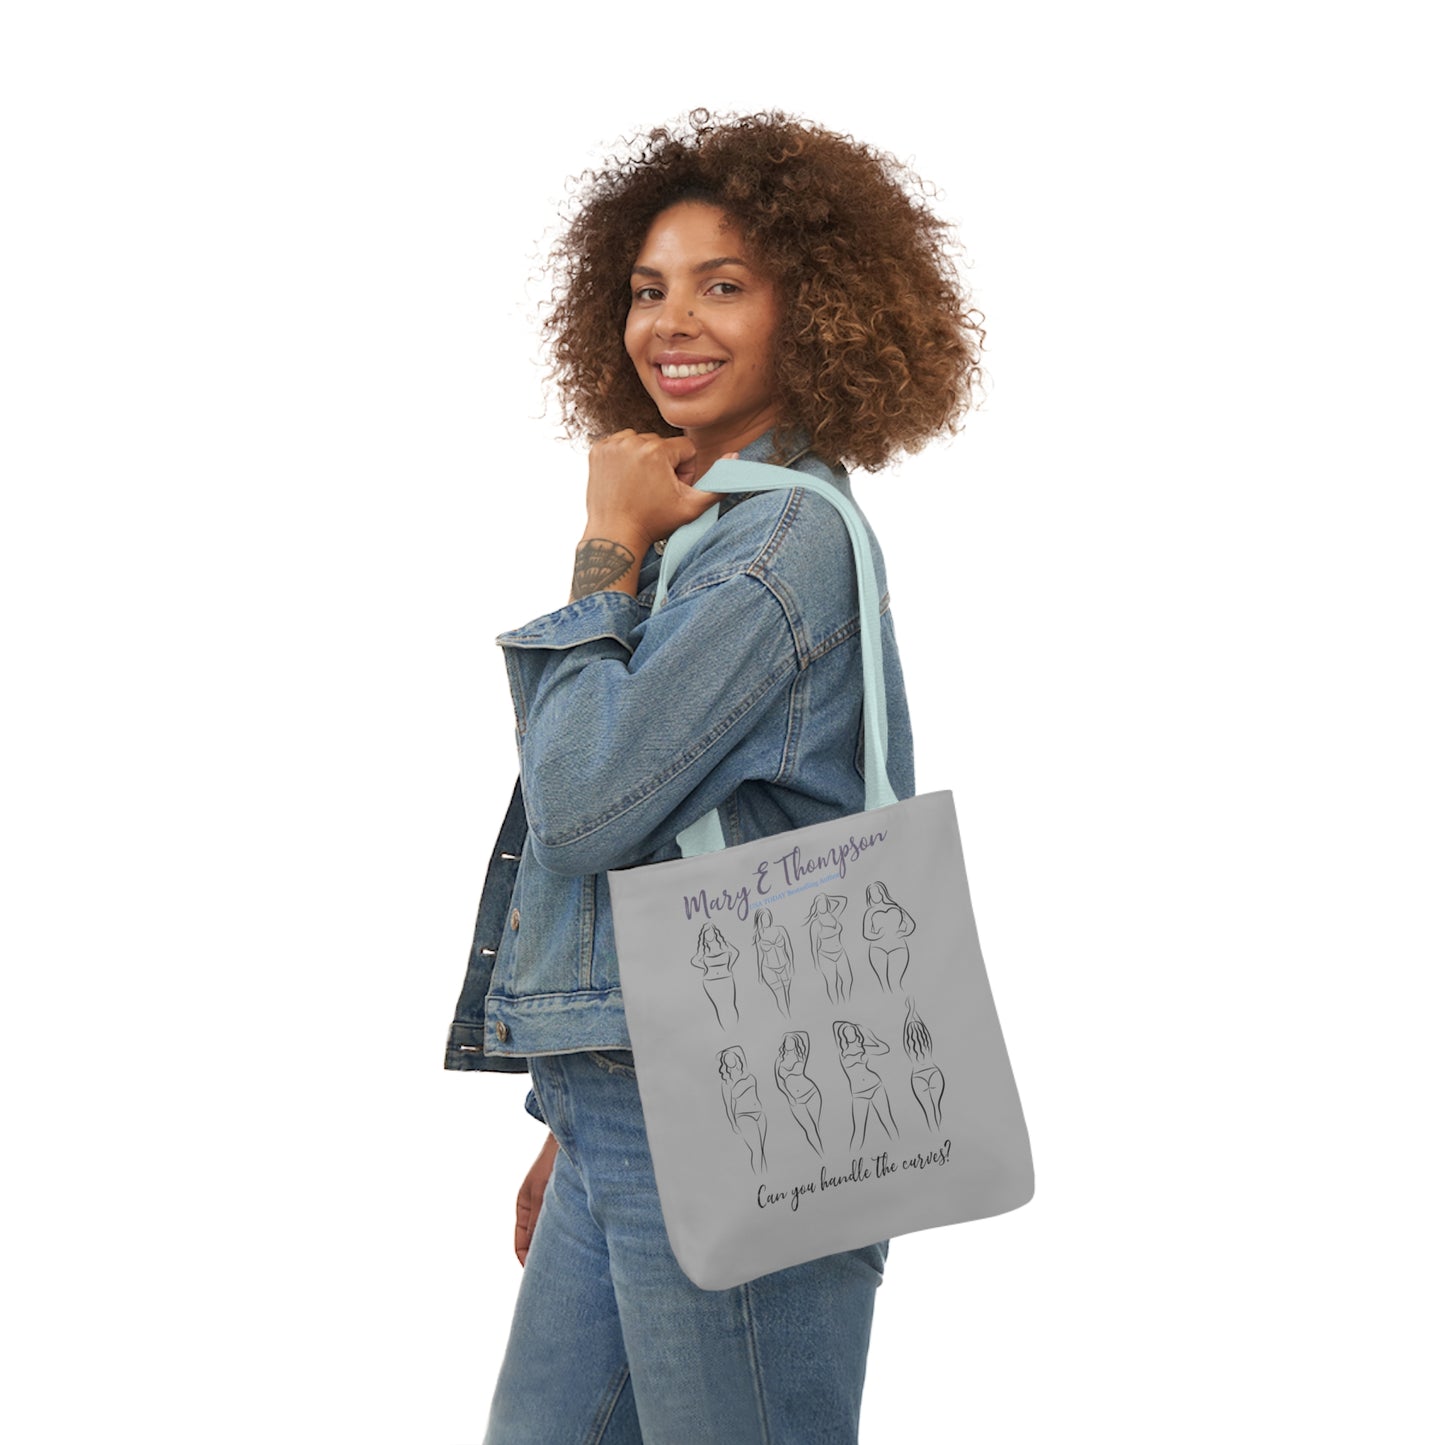 Can you handle the curves?: Polyester Canvas Tote Bag